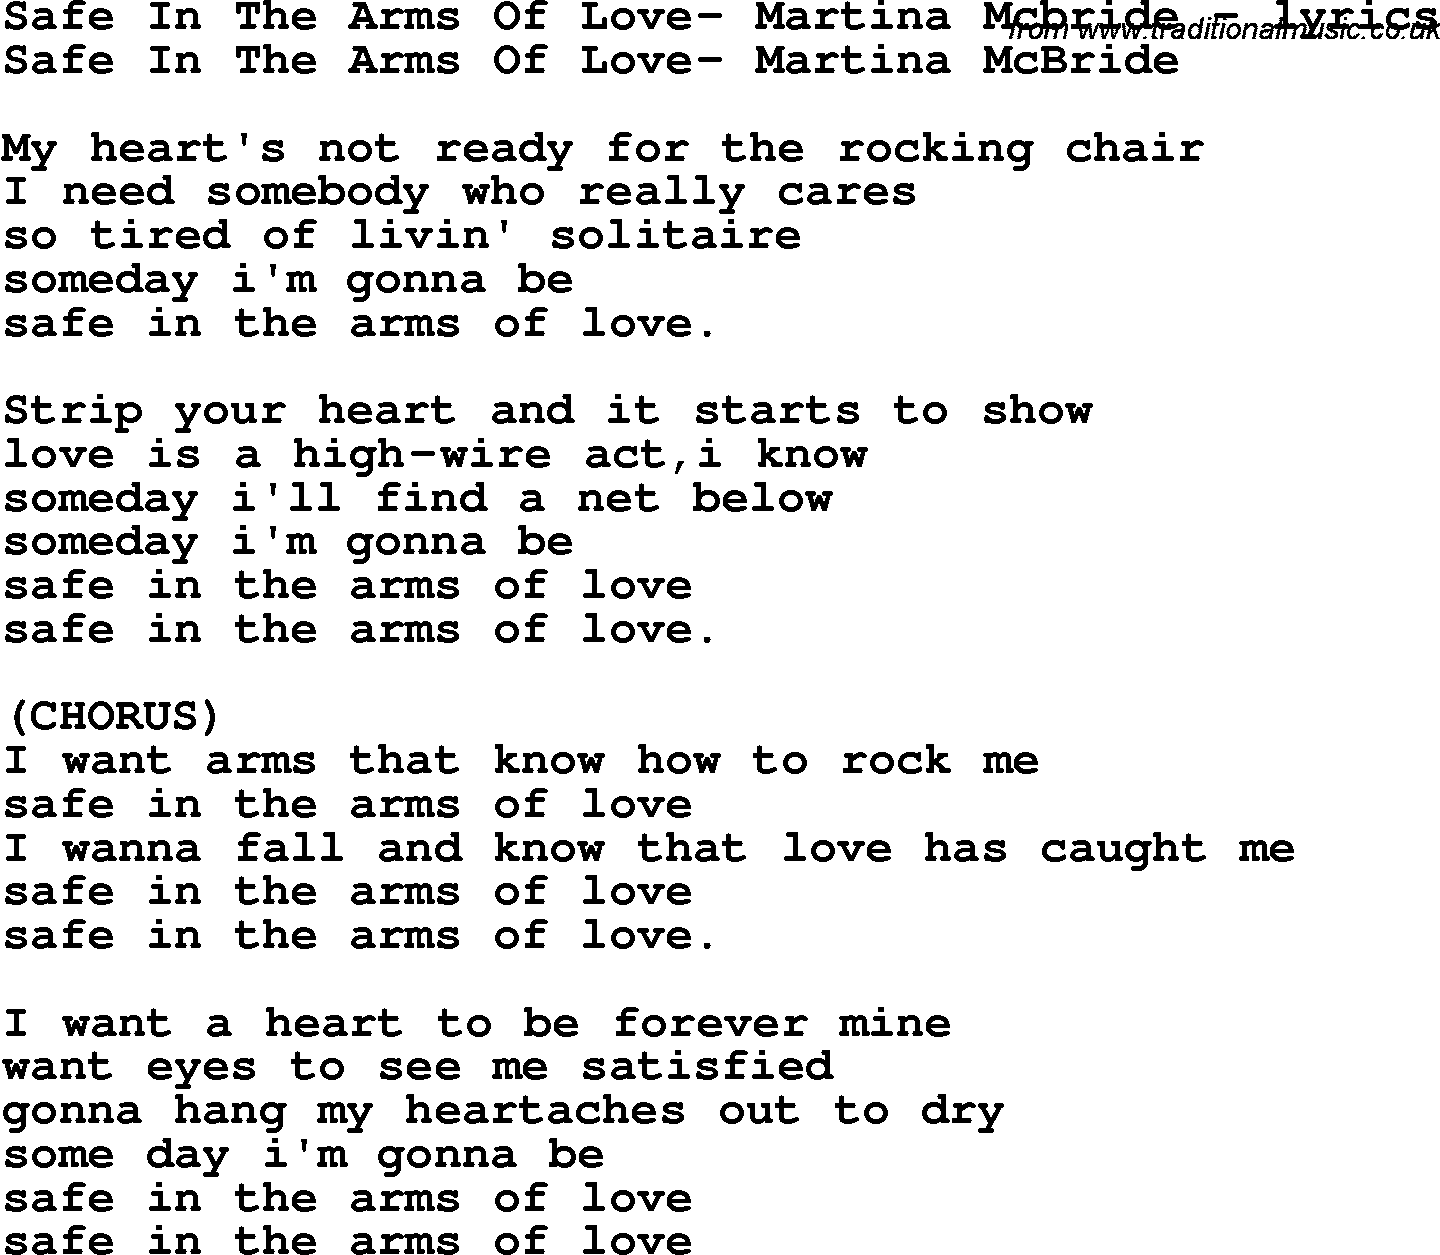 Love Song Lyrics for: Safe In The Arms Of Love- Martina Mcbride